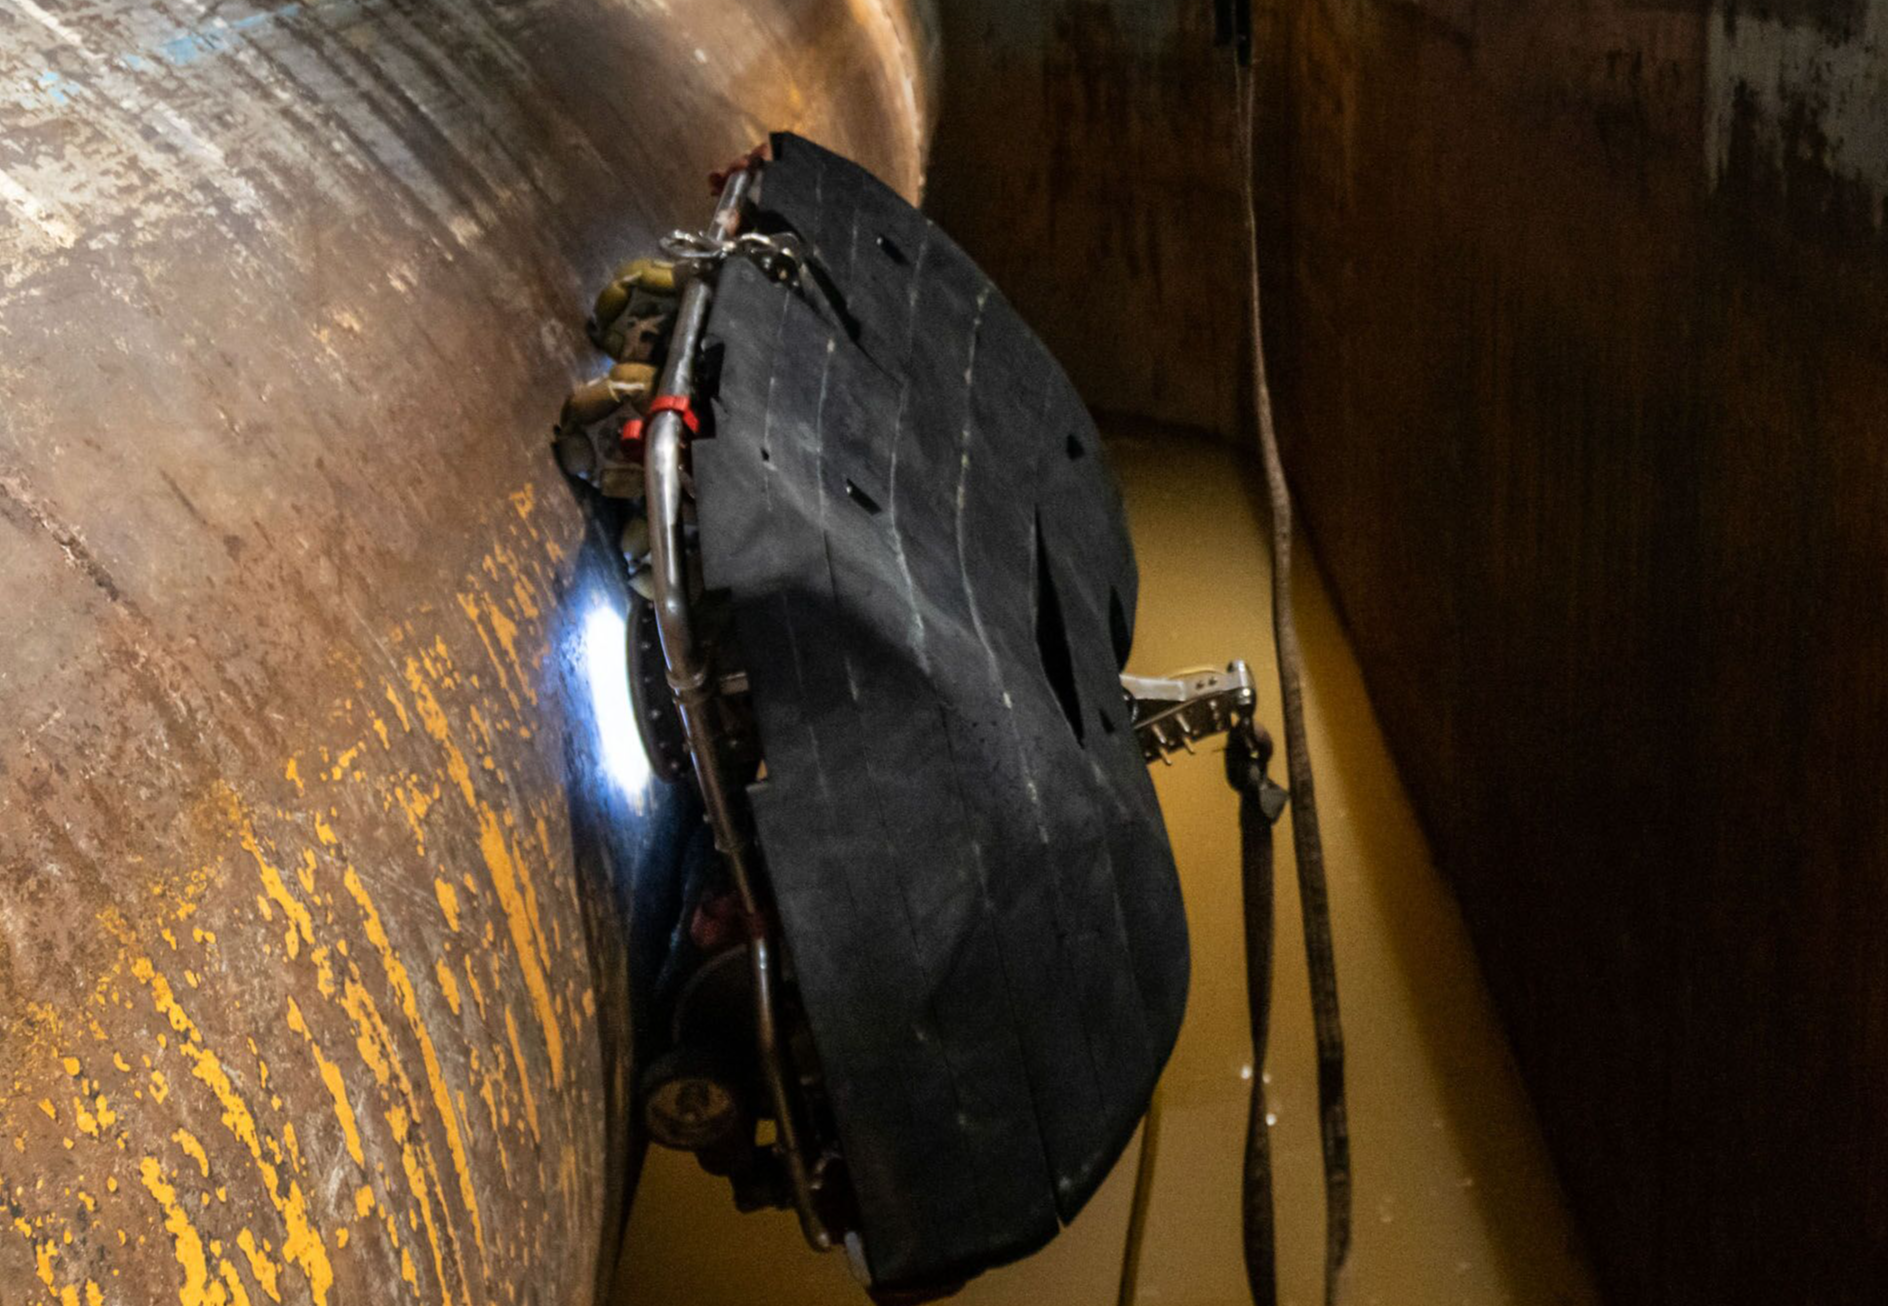 A robot built to simulate the curvature of a ship's hull and muddy water conditions.